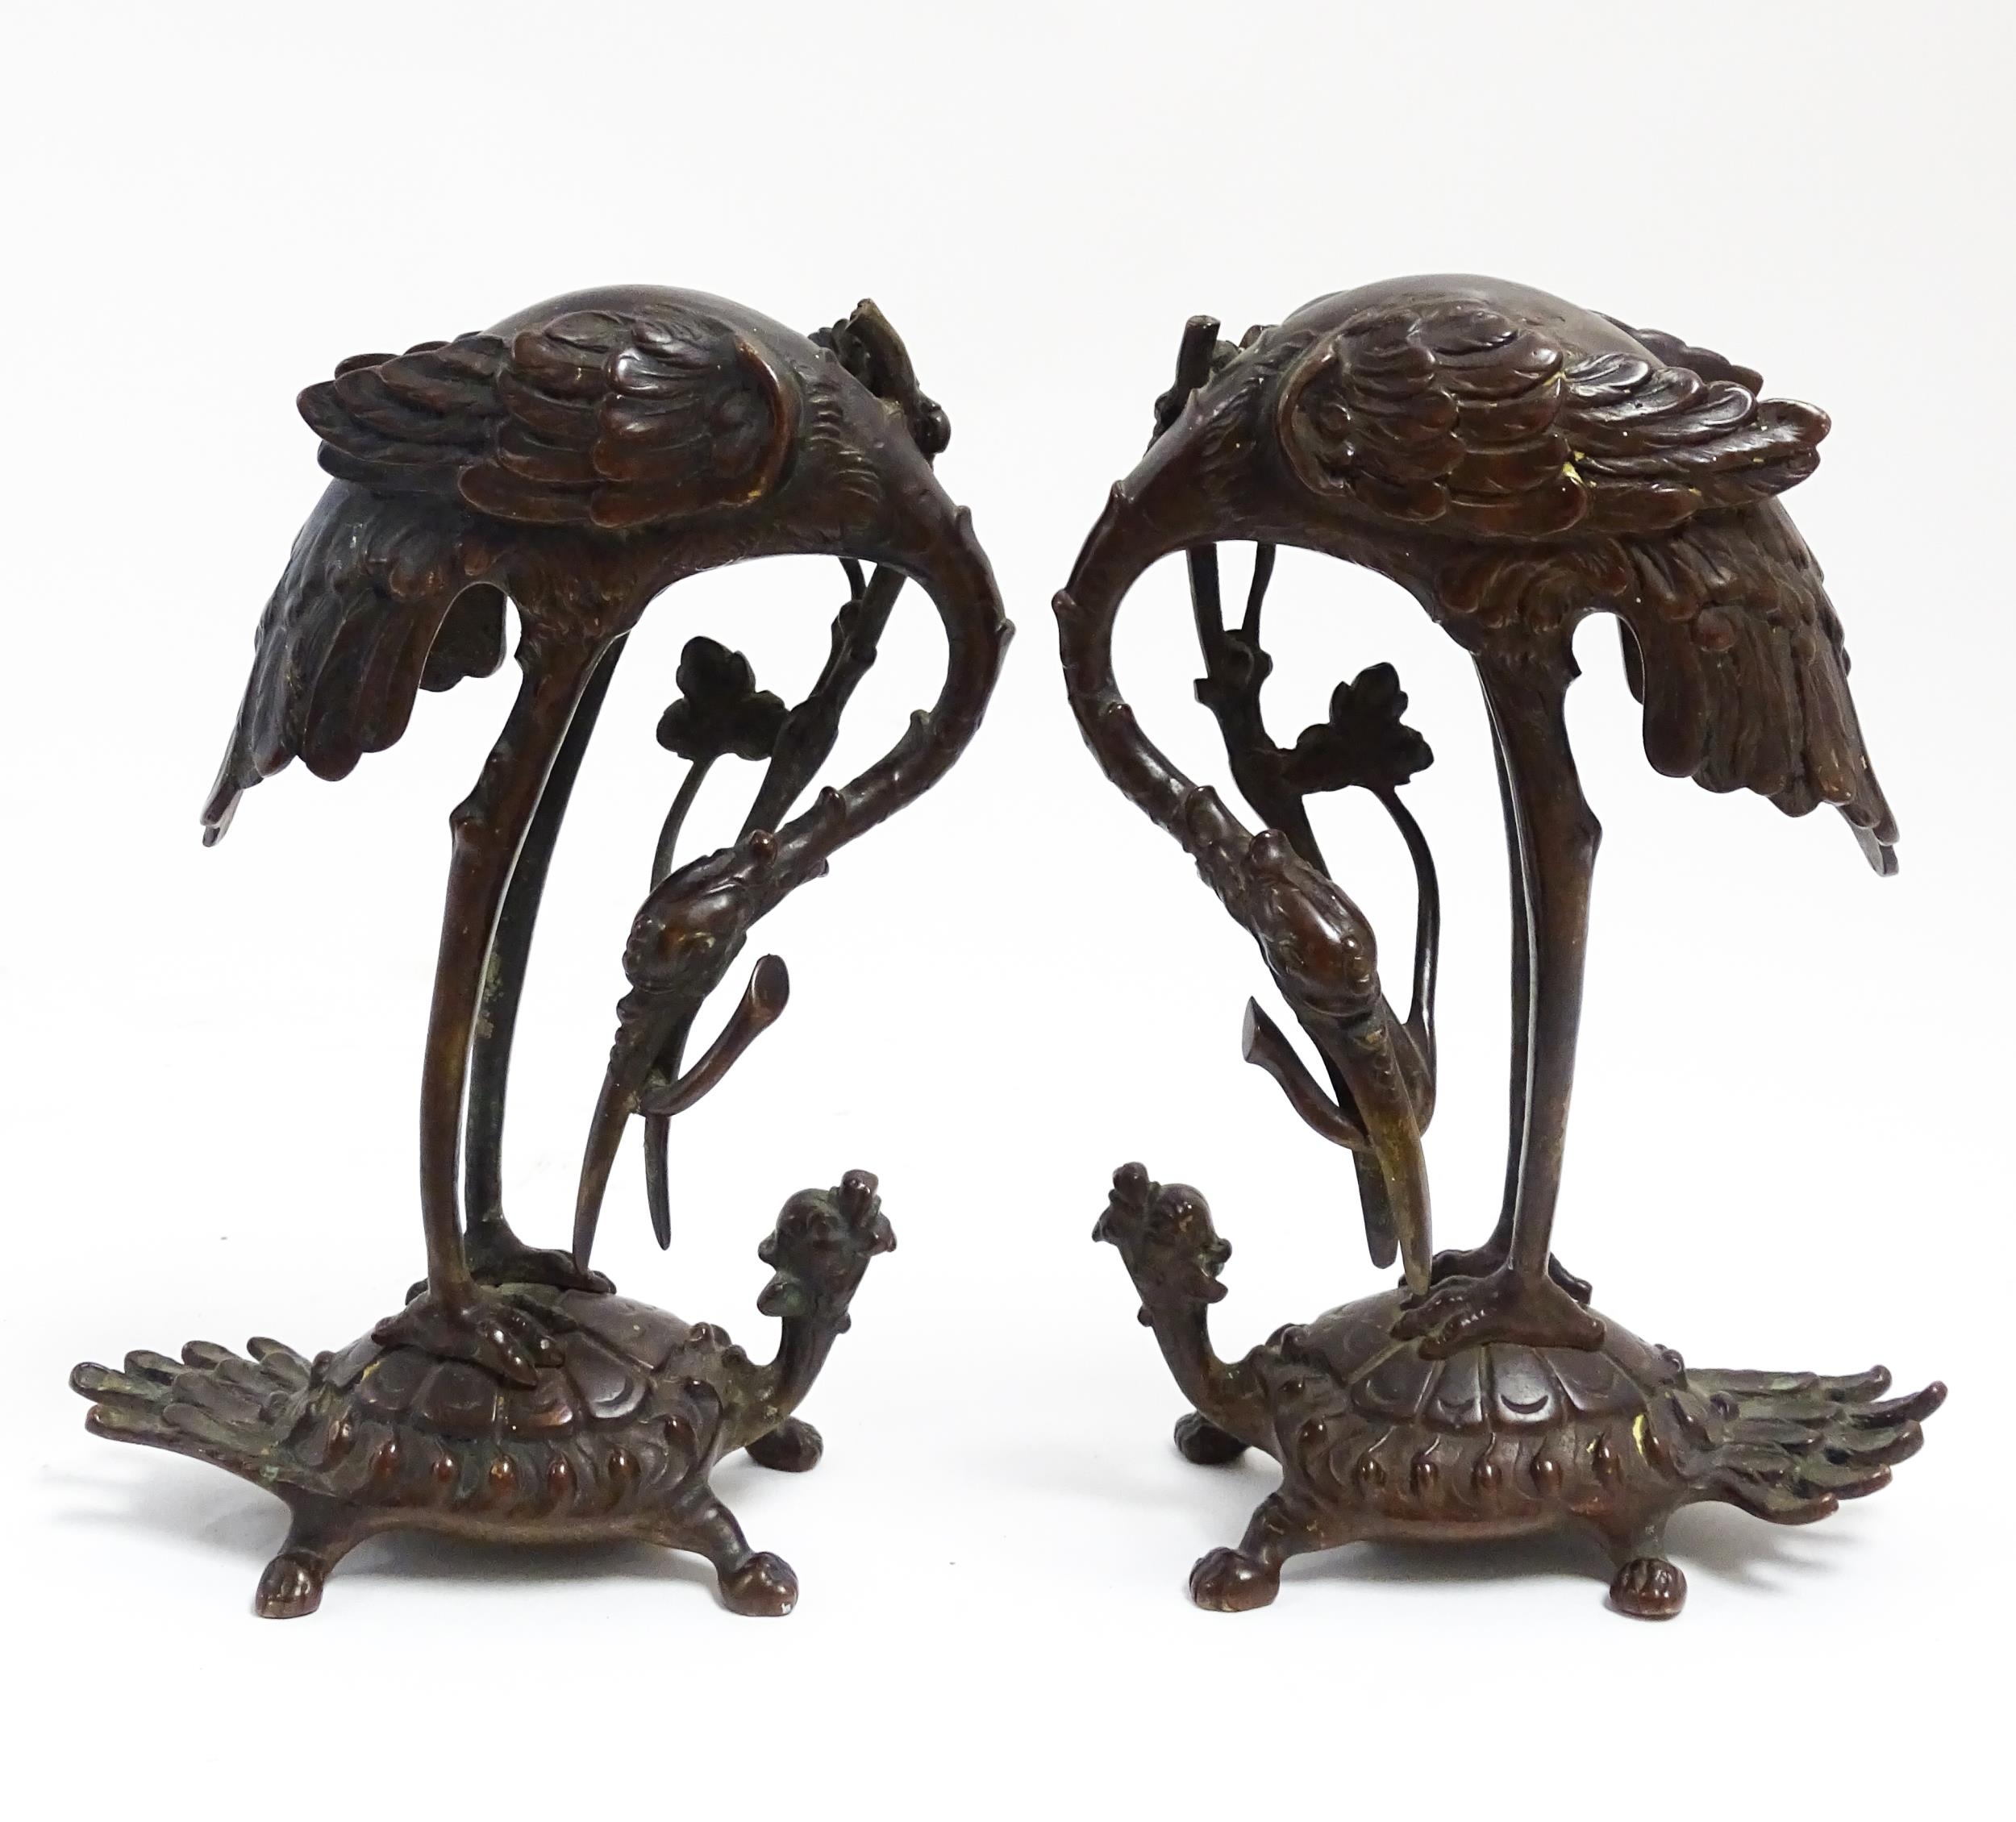 A pair of Japanese cast sculptures modelled as a stylised crane standing on a tortoise. Approx. 7